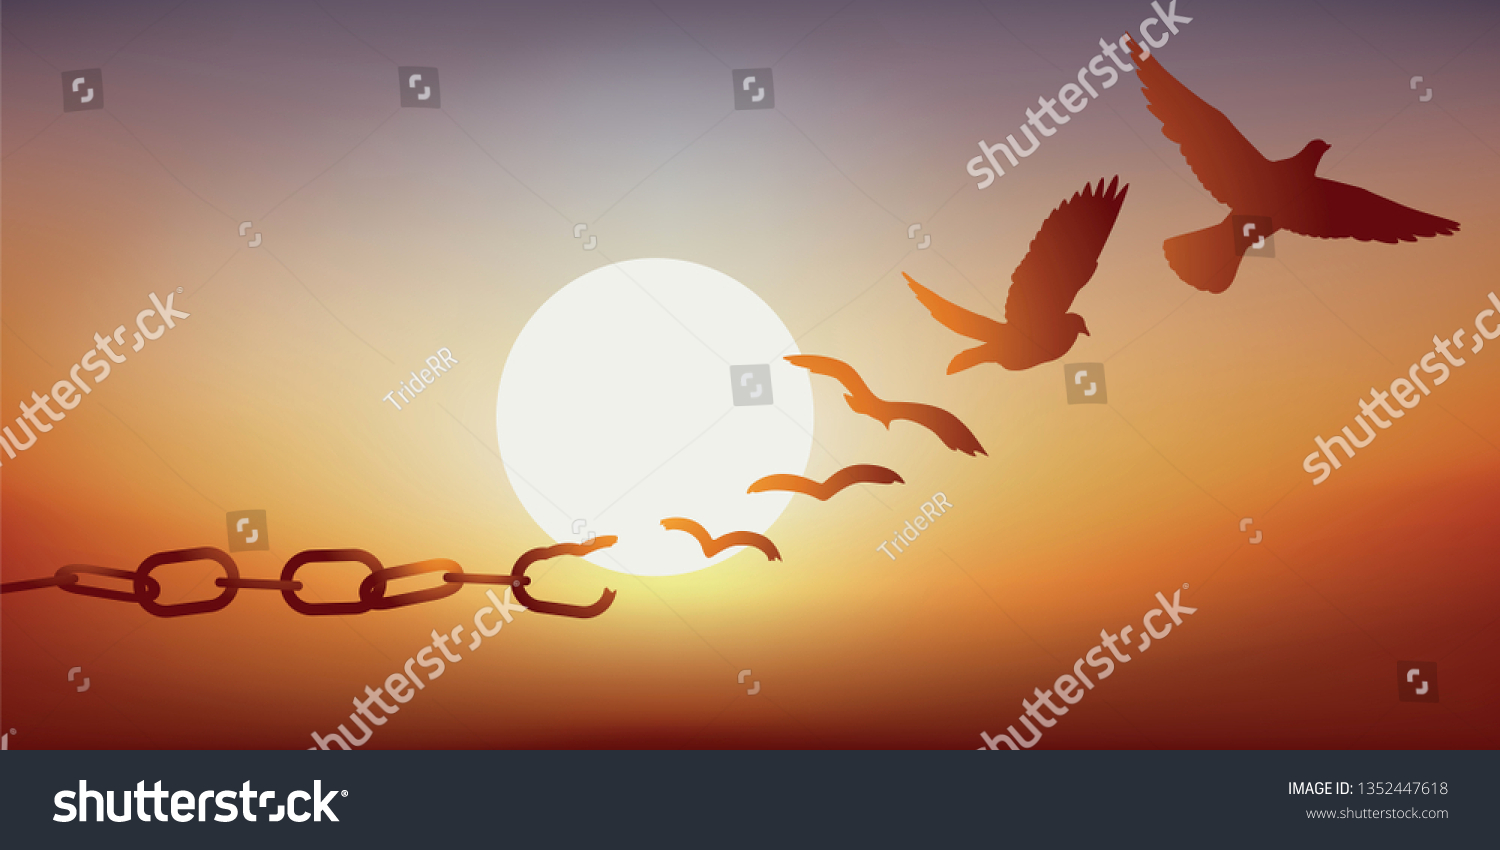 Concept of liberty found, with chains breaking and turning into a dove flying off at sunset. #1352447618